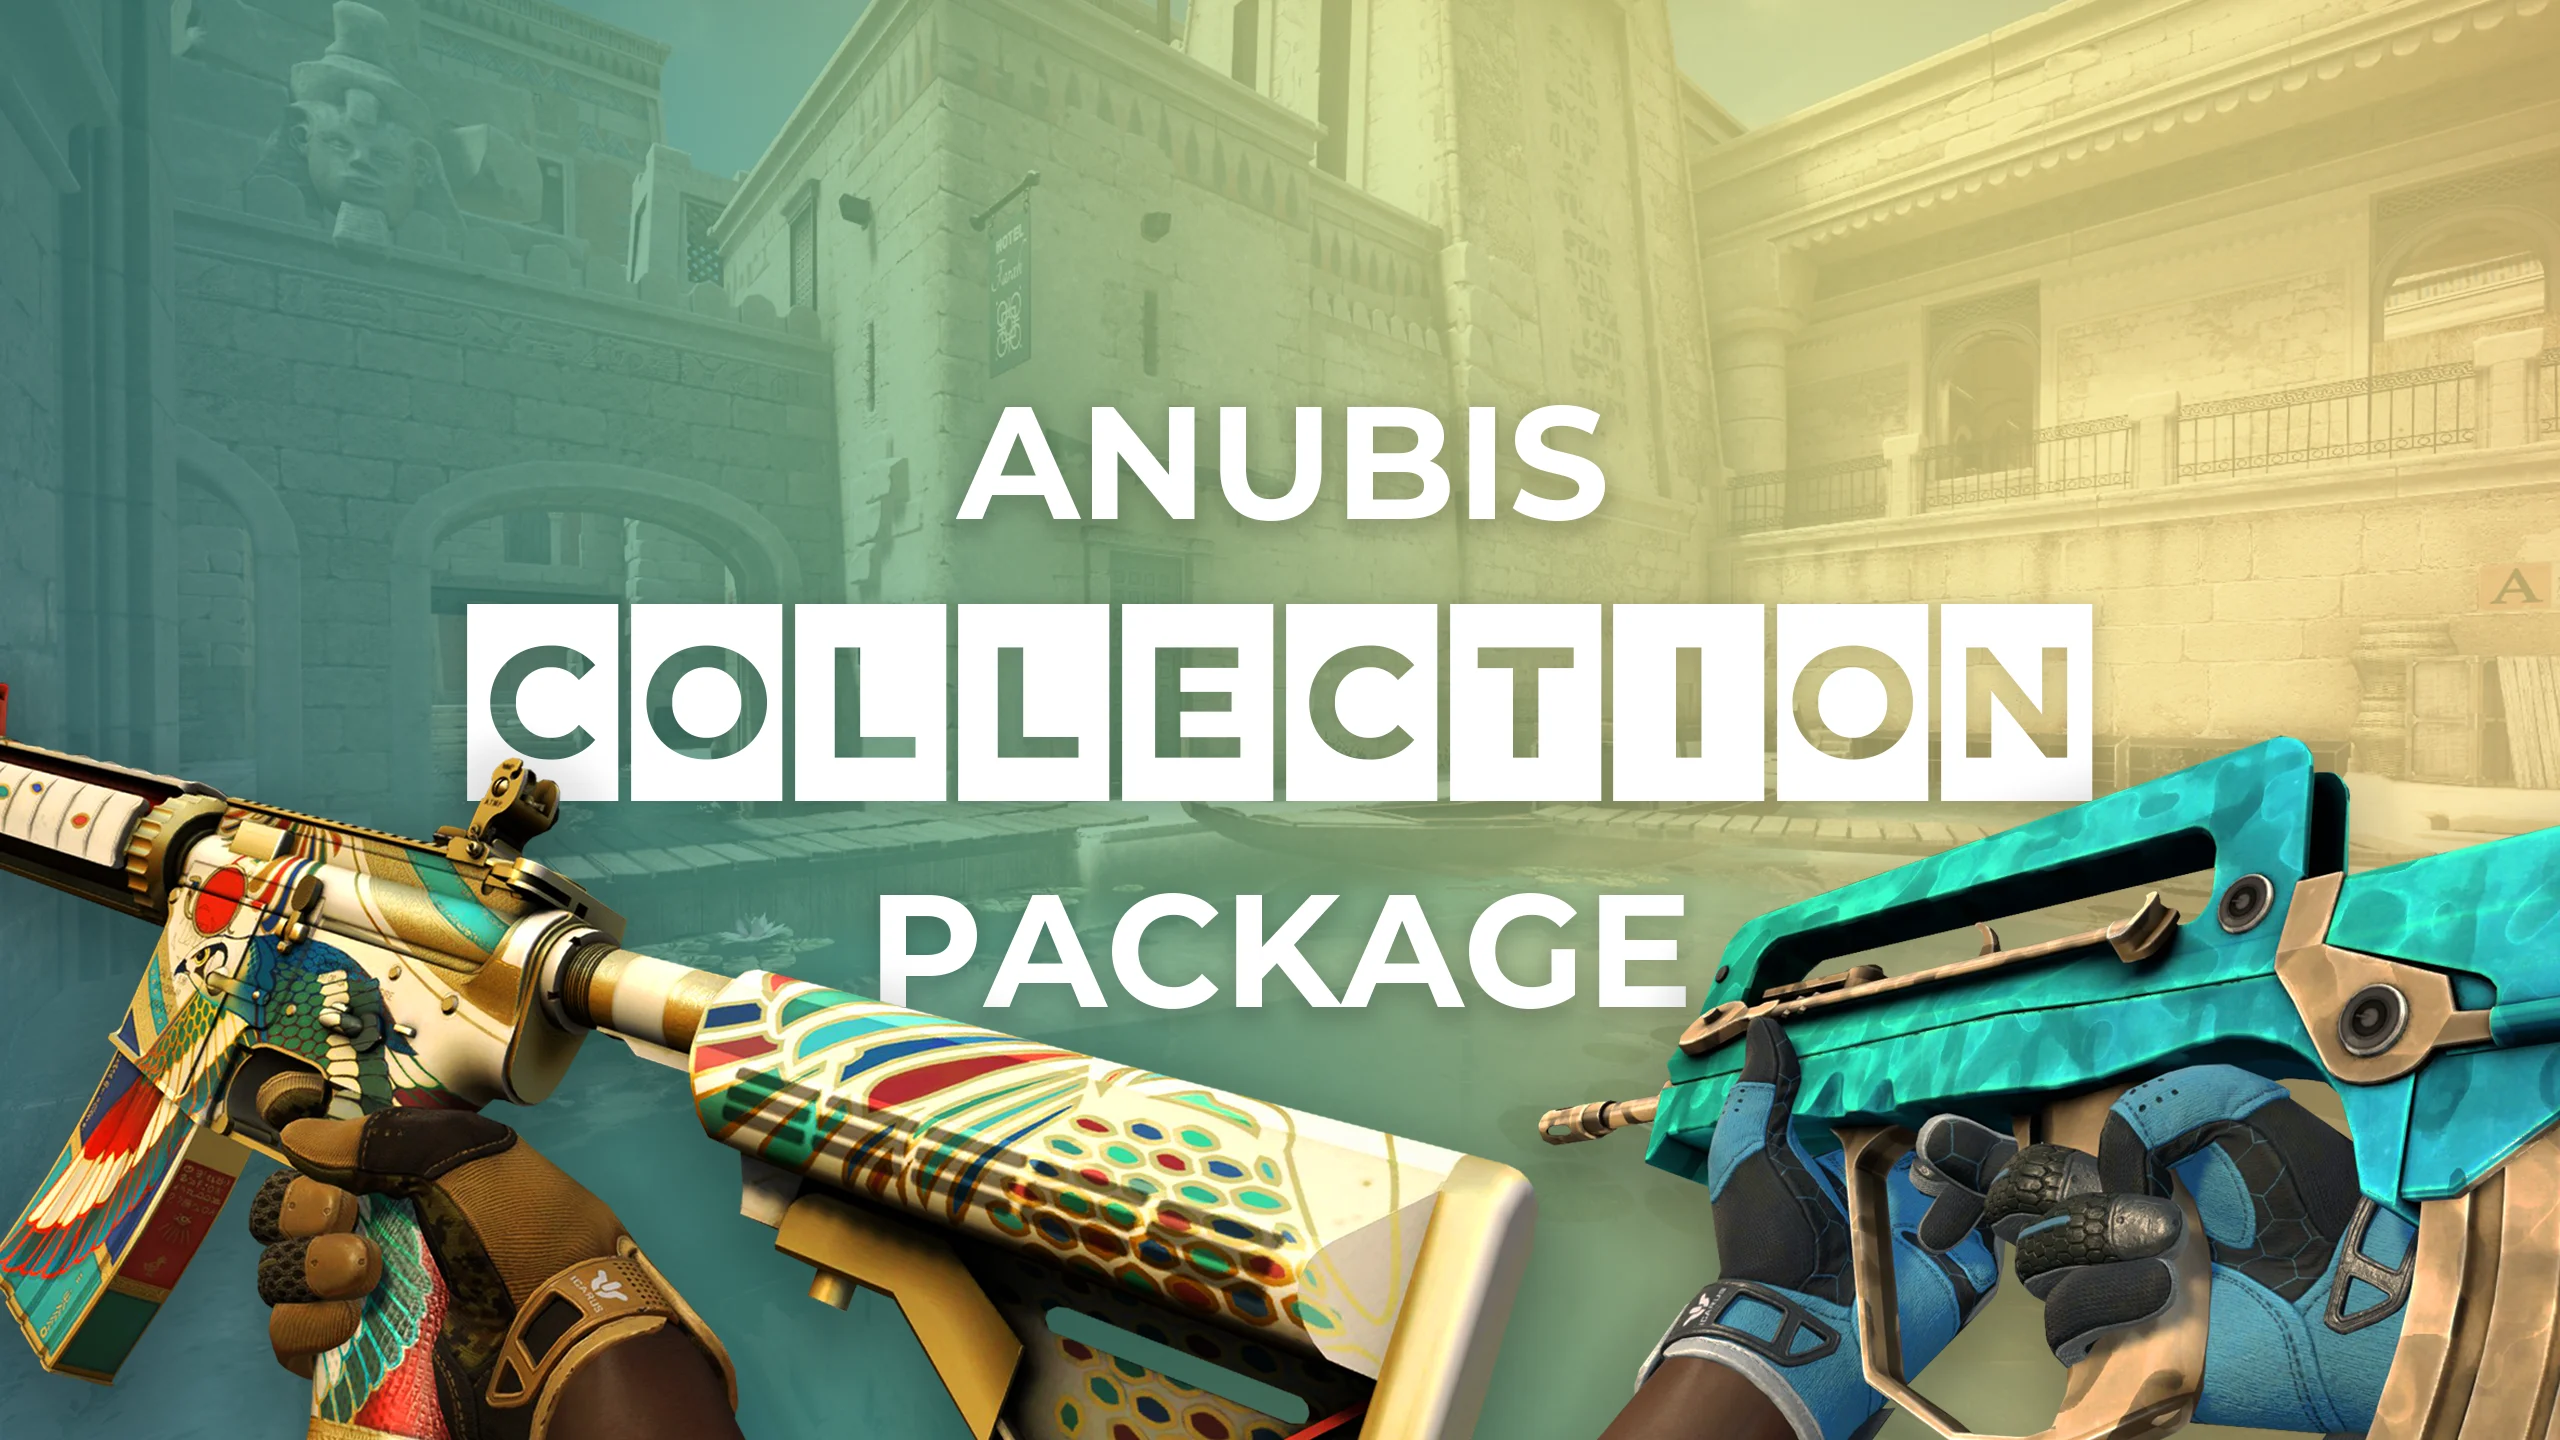 The Anubis Collection has arrived in CS:GO!